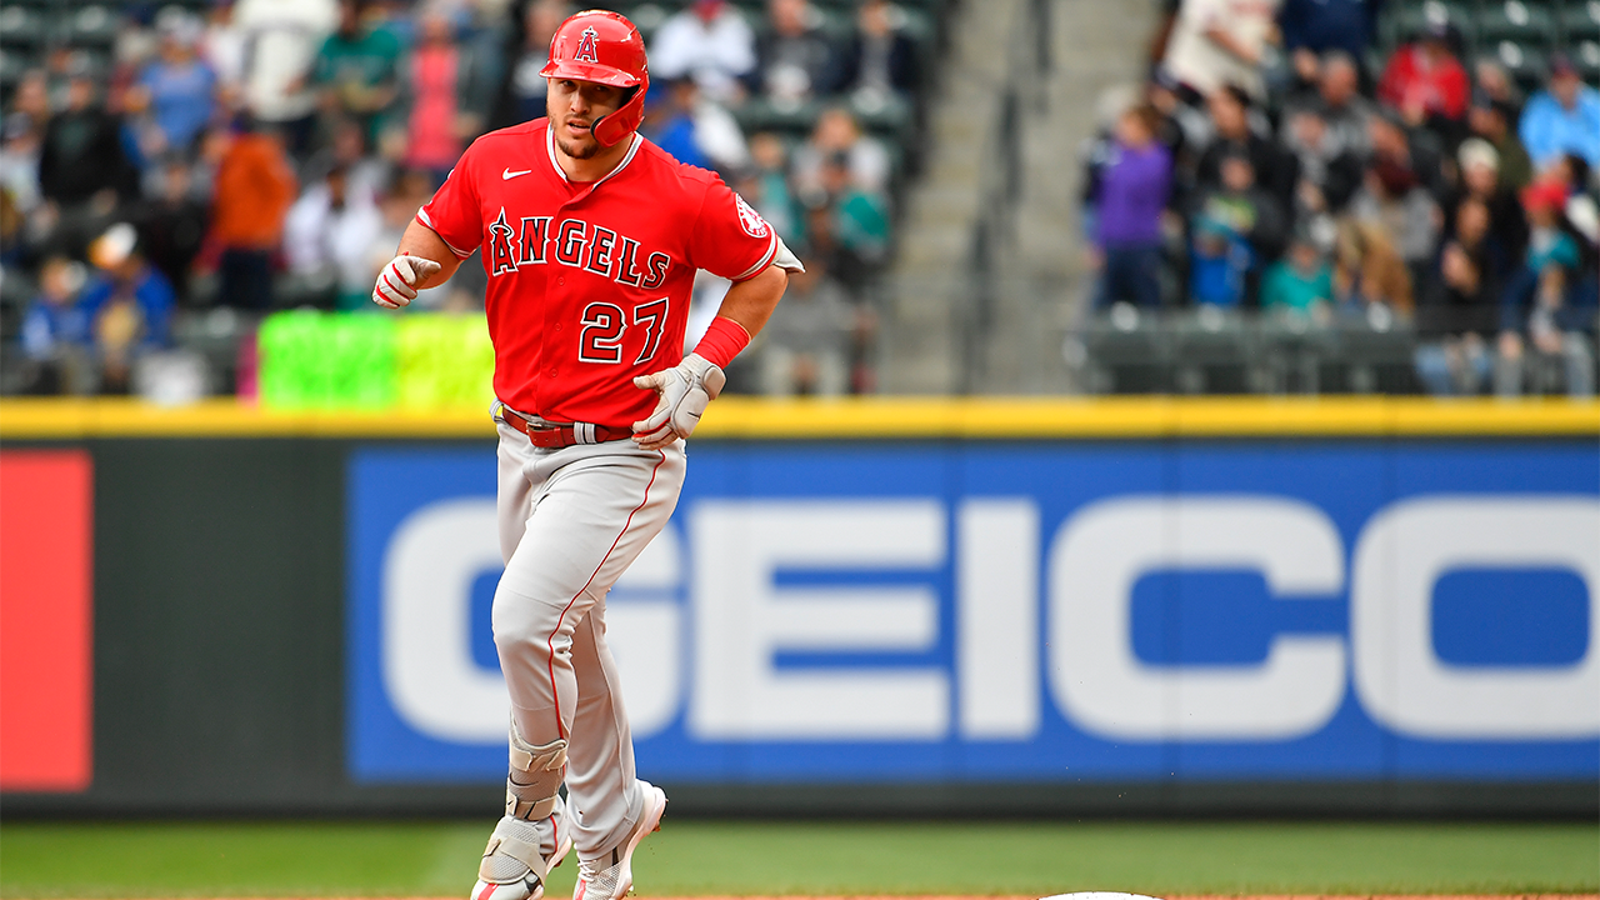 Mike Trout hits go-ahead home run in extra innings